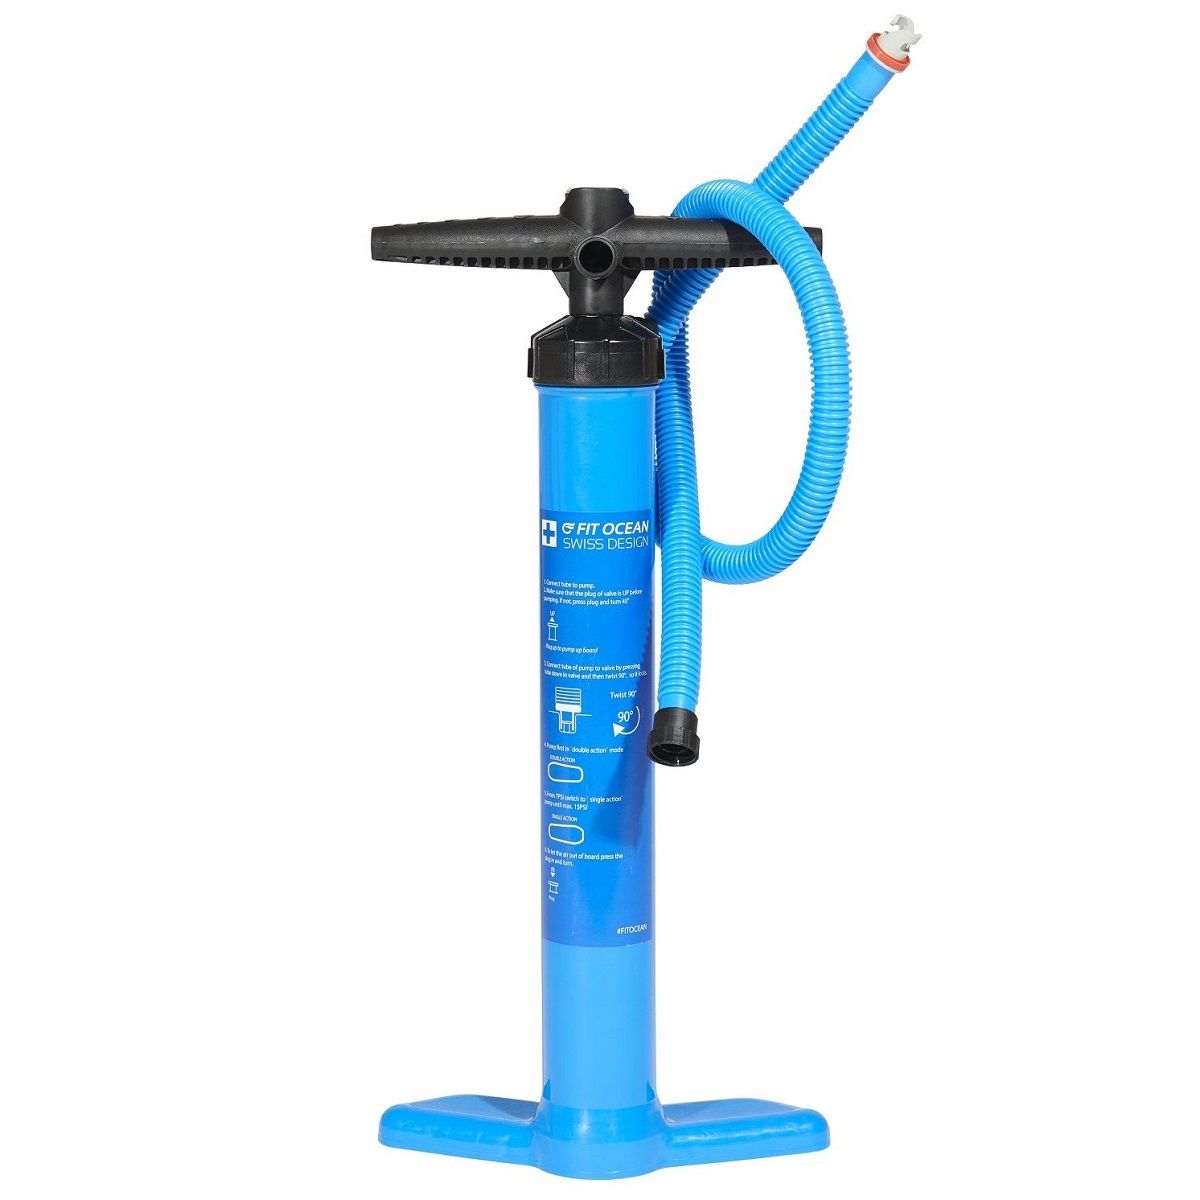 FIT OCEAN Double Action SUP Pump HP4 - Faster on the Water